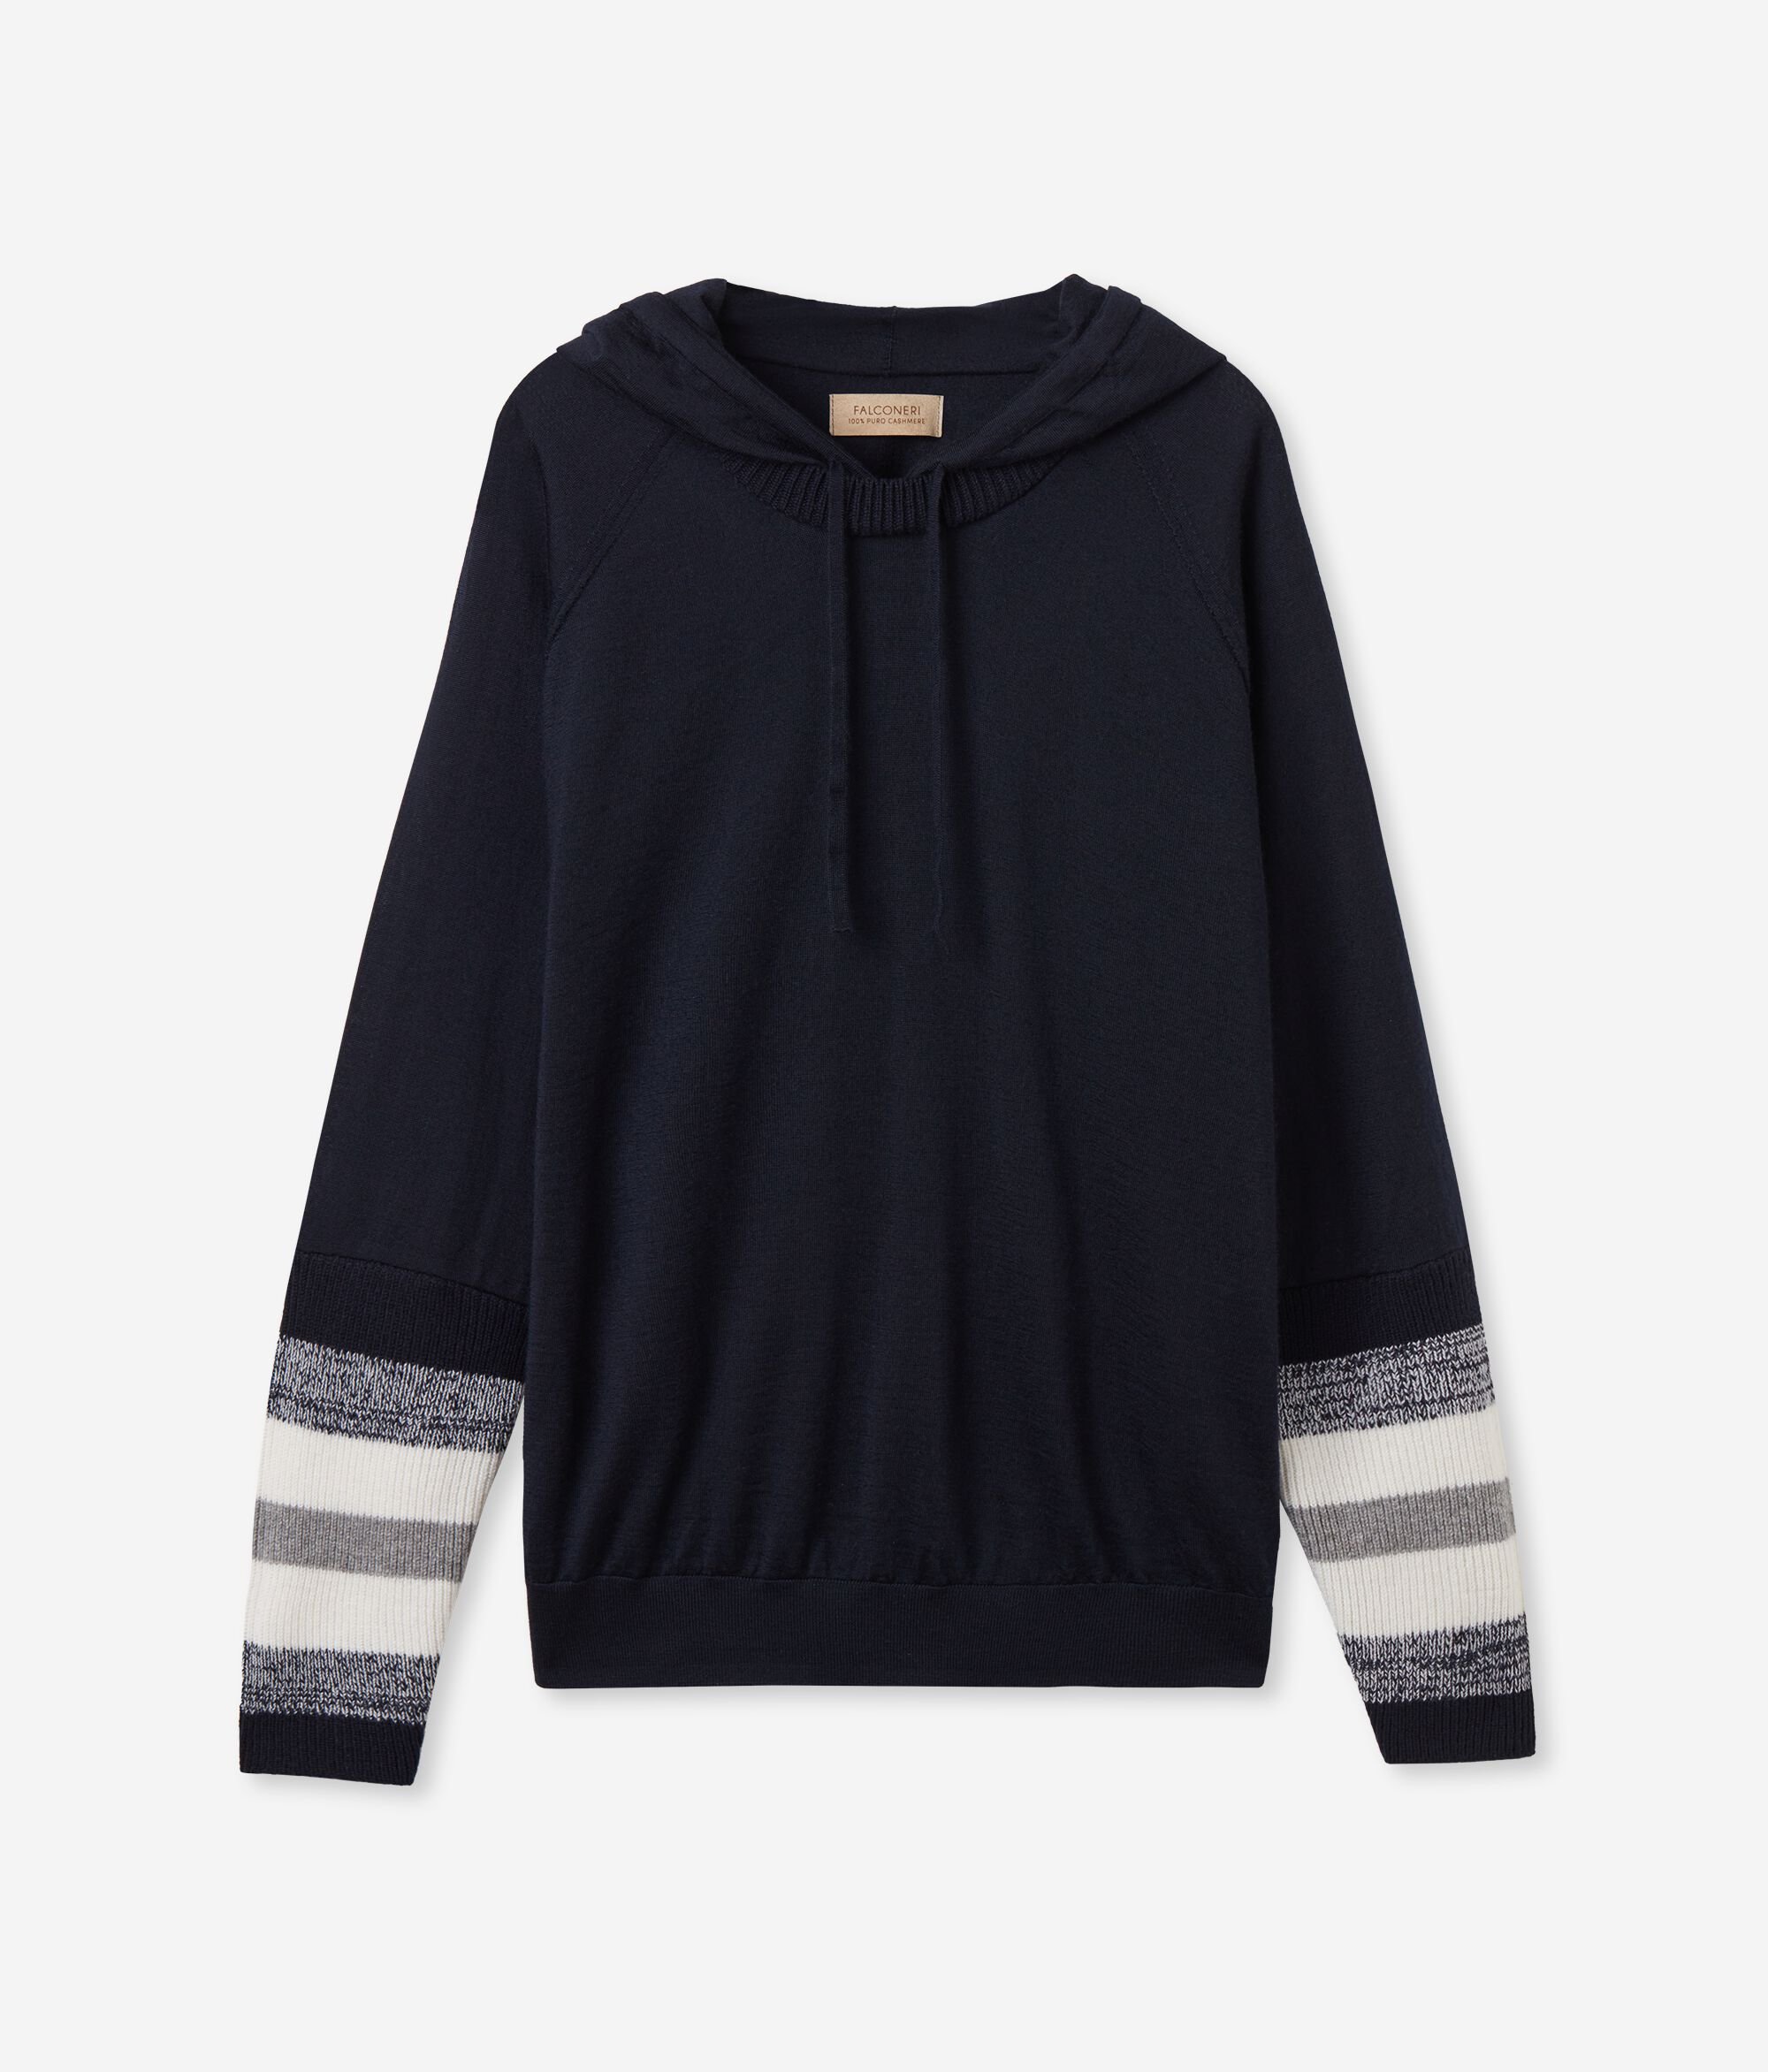 Cashmere Sweatshirt with Banded Sleeves